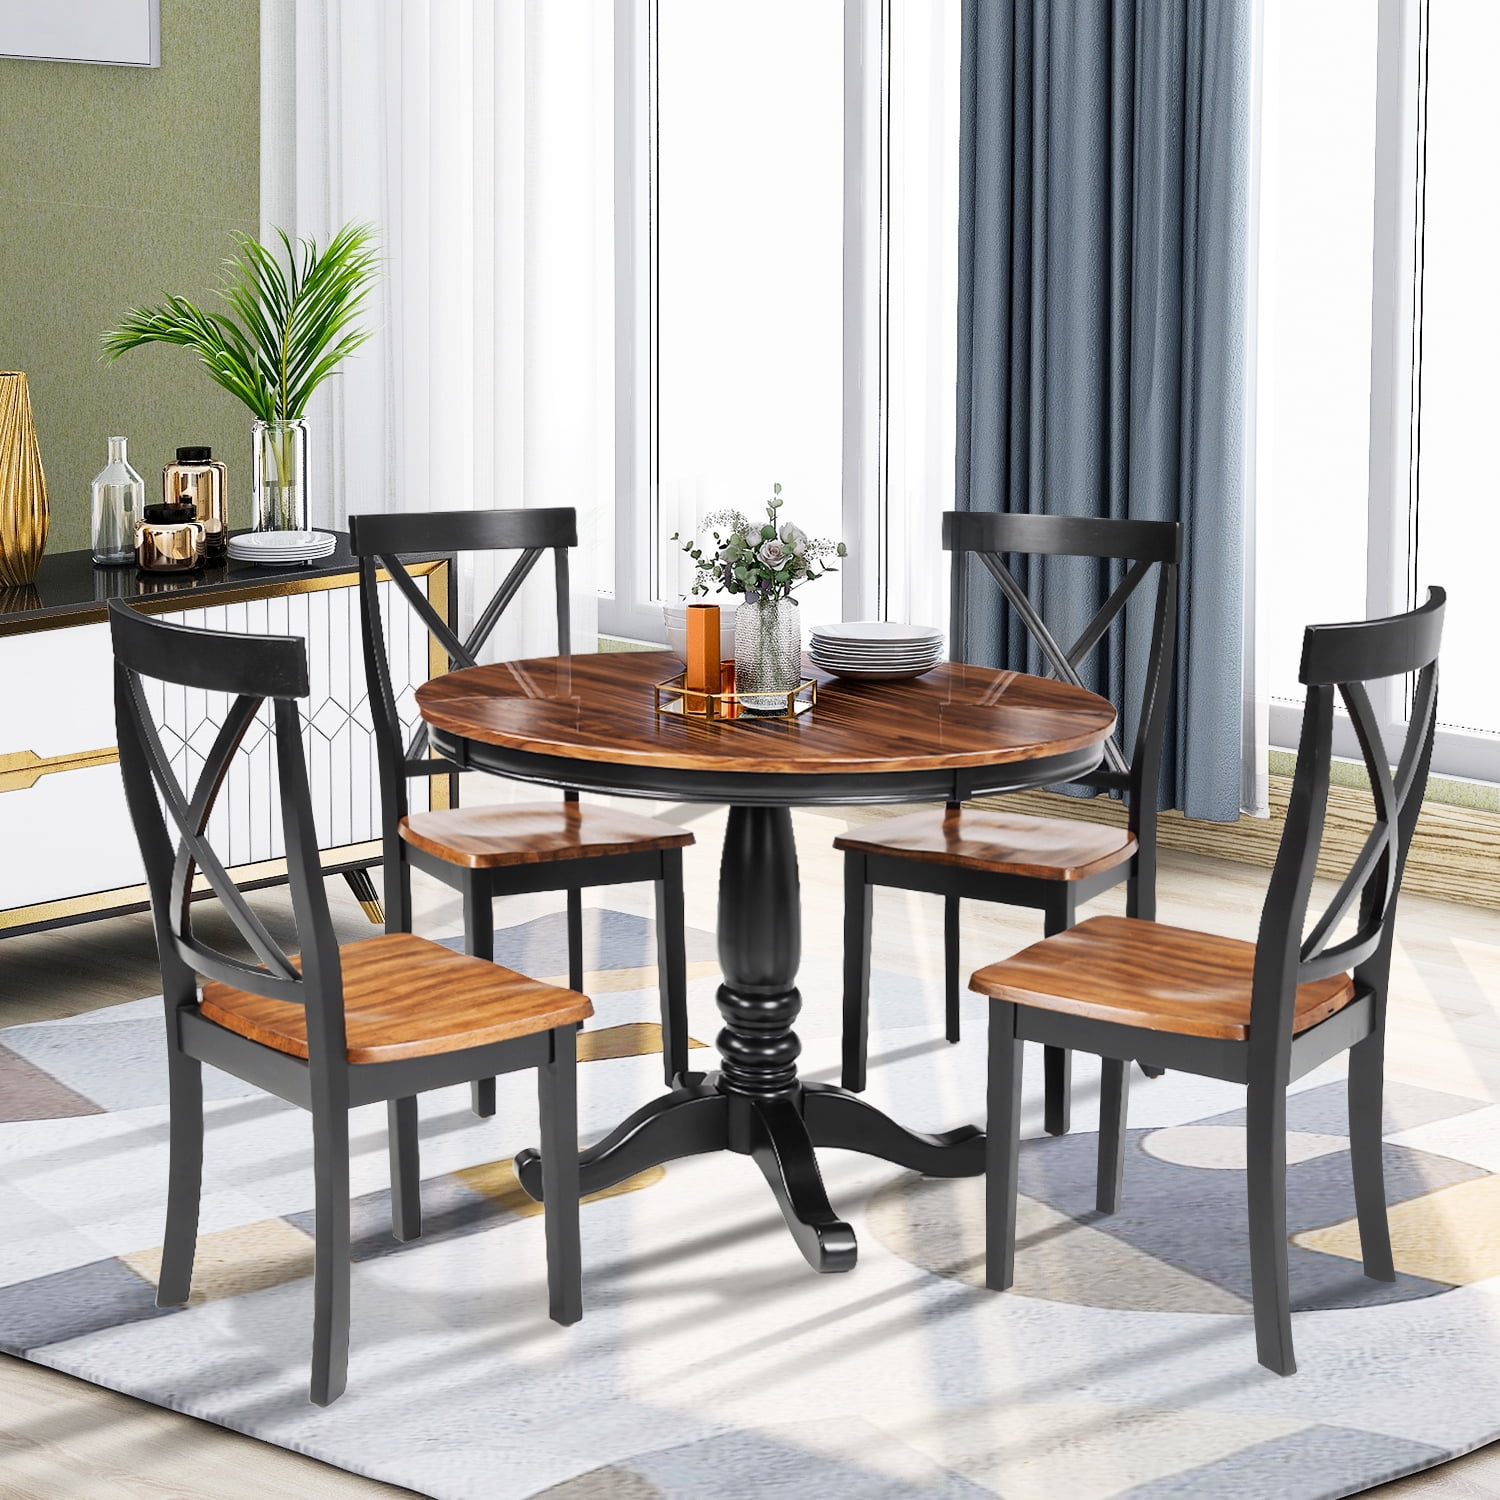 Round Dining Room Table Set for 4 Persons, 5 Piece Dining Room Table ...